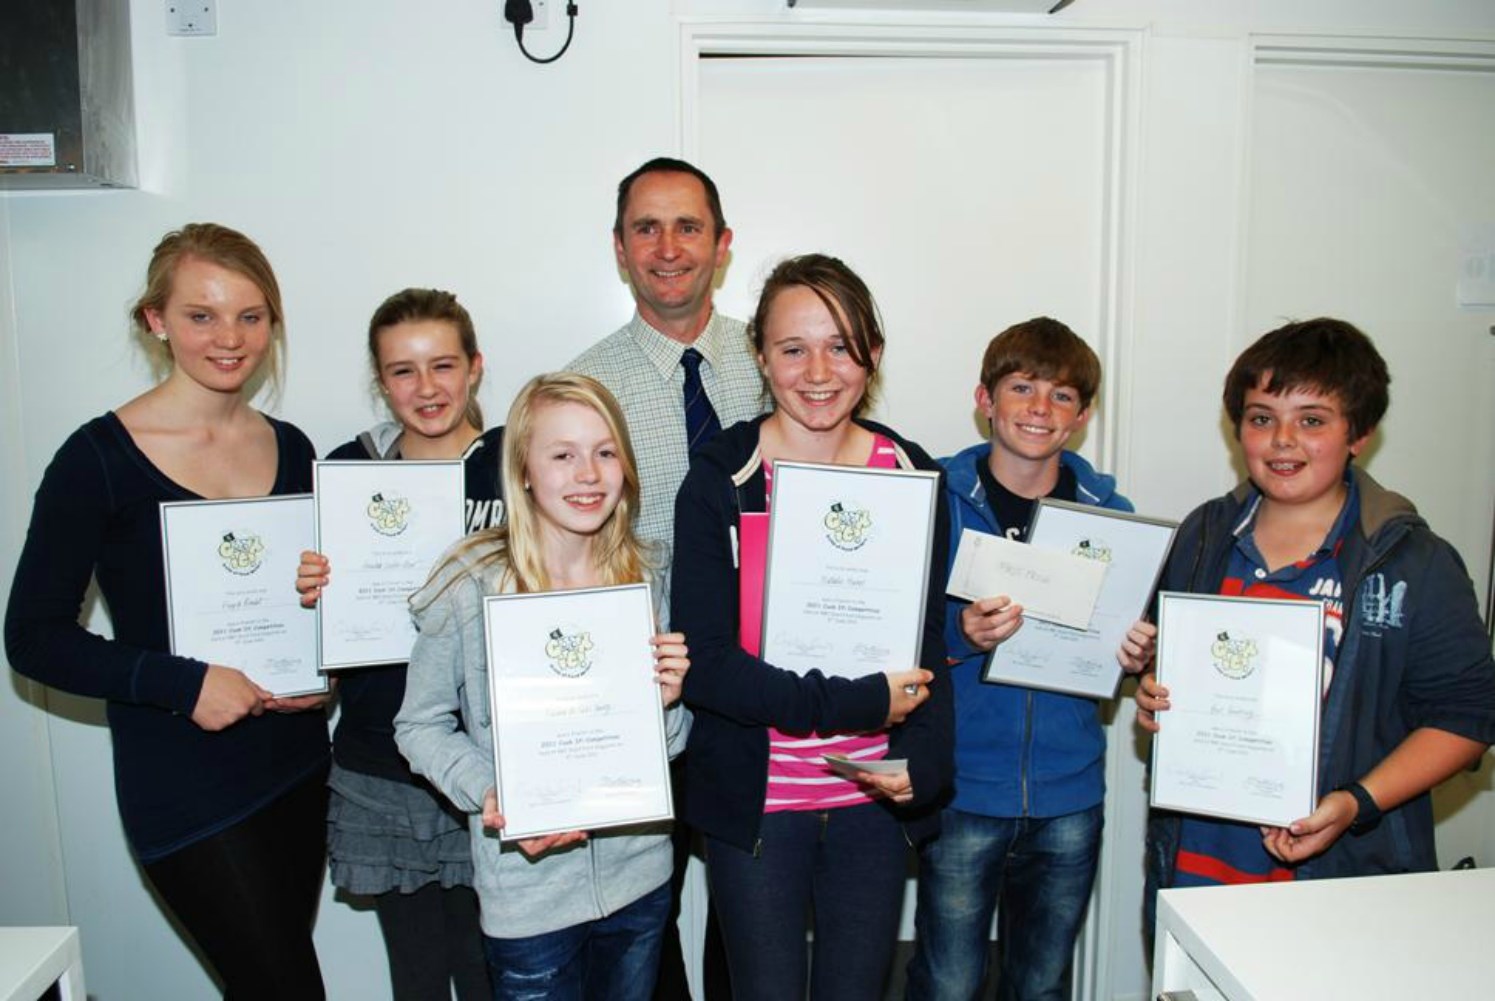 The finalists with Andrew Payling: from left to right Freya, Amelia, Emma, Andrew Payling, Natalie, Elliot and Ben